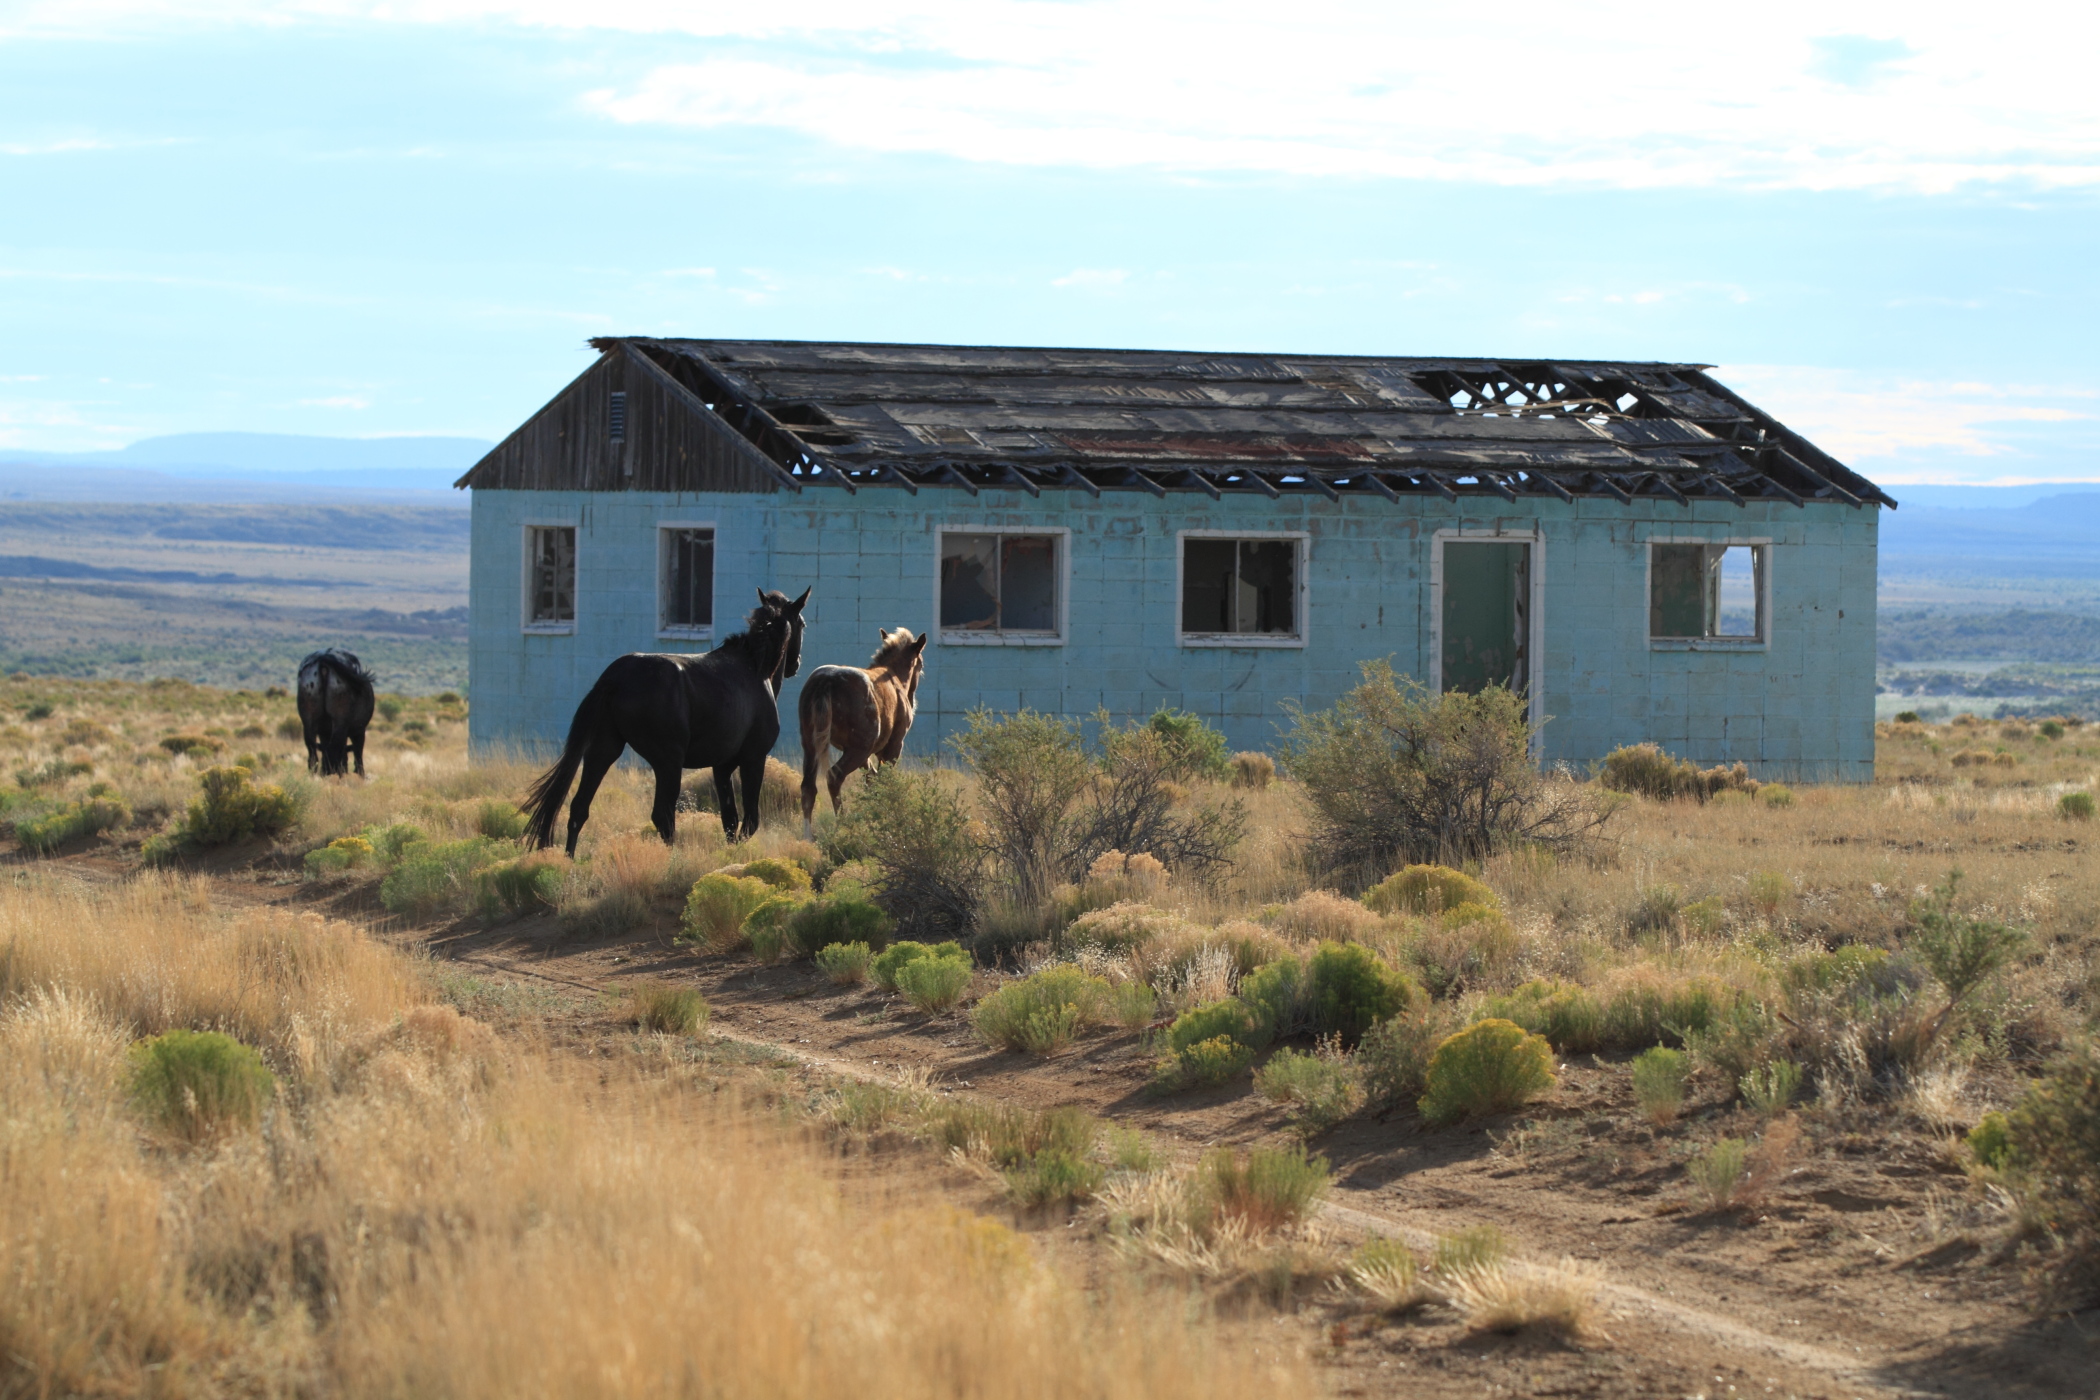 Horses gather around abandoned home in the Navajo Nation's Eastern Agency on road leading from US Route 550 to Chaco Culture National Historical Park in northwest New Mexico. The Chaco Canyon area is home to a variety of wildlife such as elk, deer, bobcats, wild horses, snakes, and many bird species.